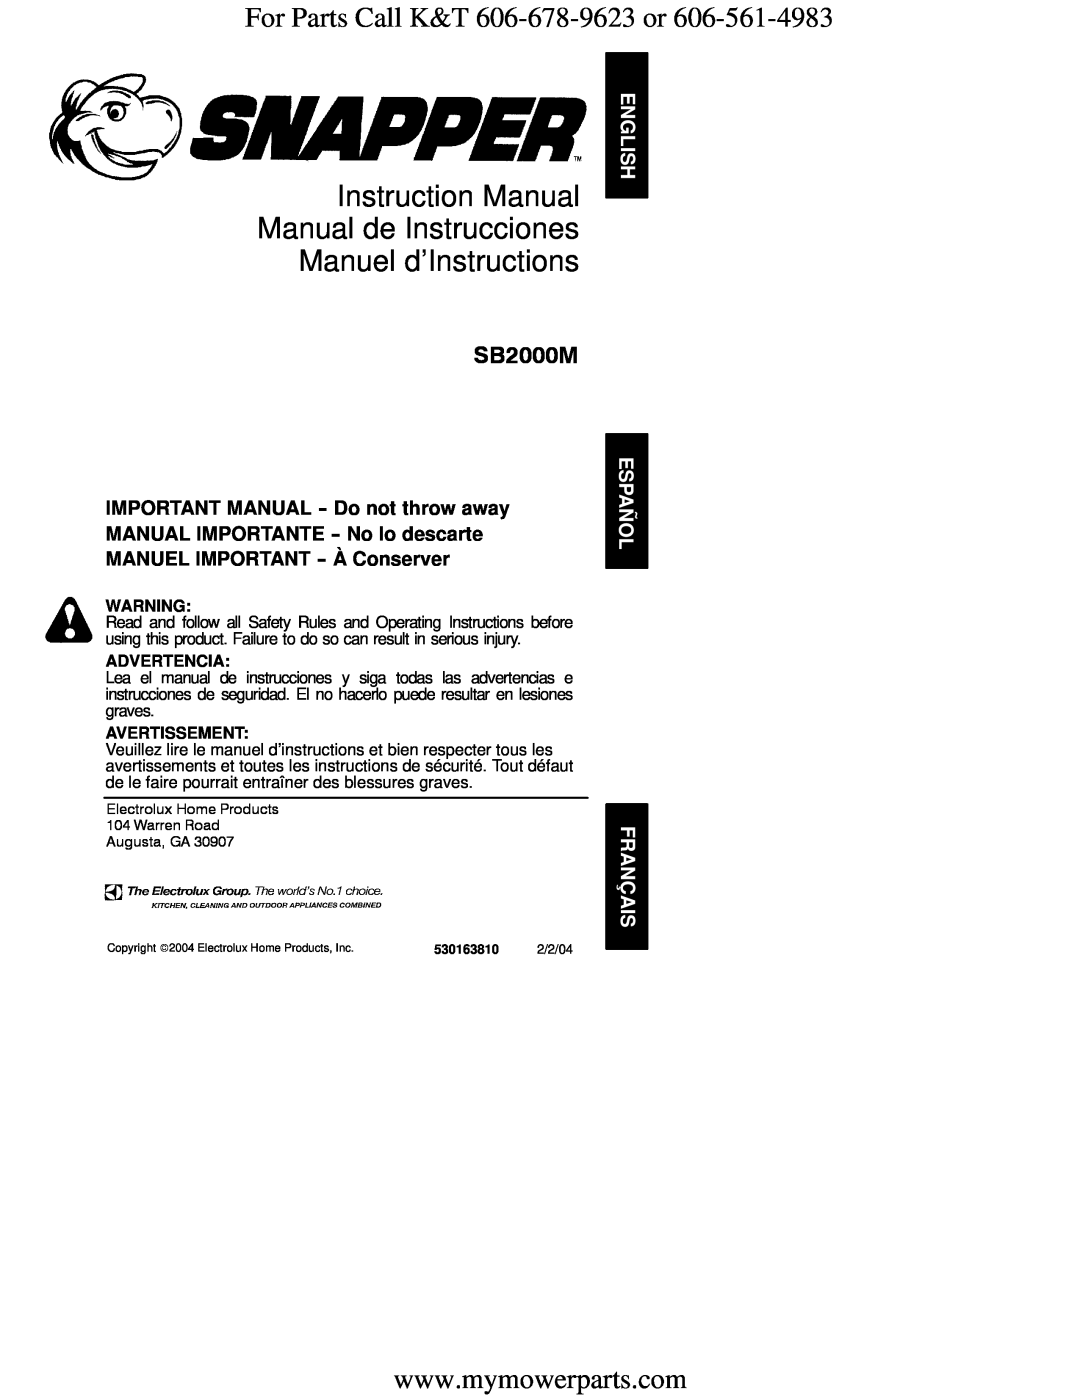 Snapper SB2000M instruction manual For Parts Call K&T 606-678-9623 or, IMPORTANT MANUAL -- Do not throw away, Advertencia 